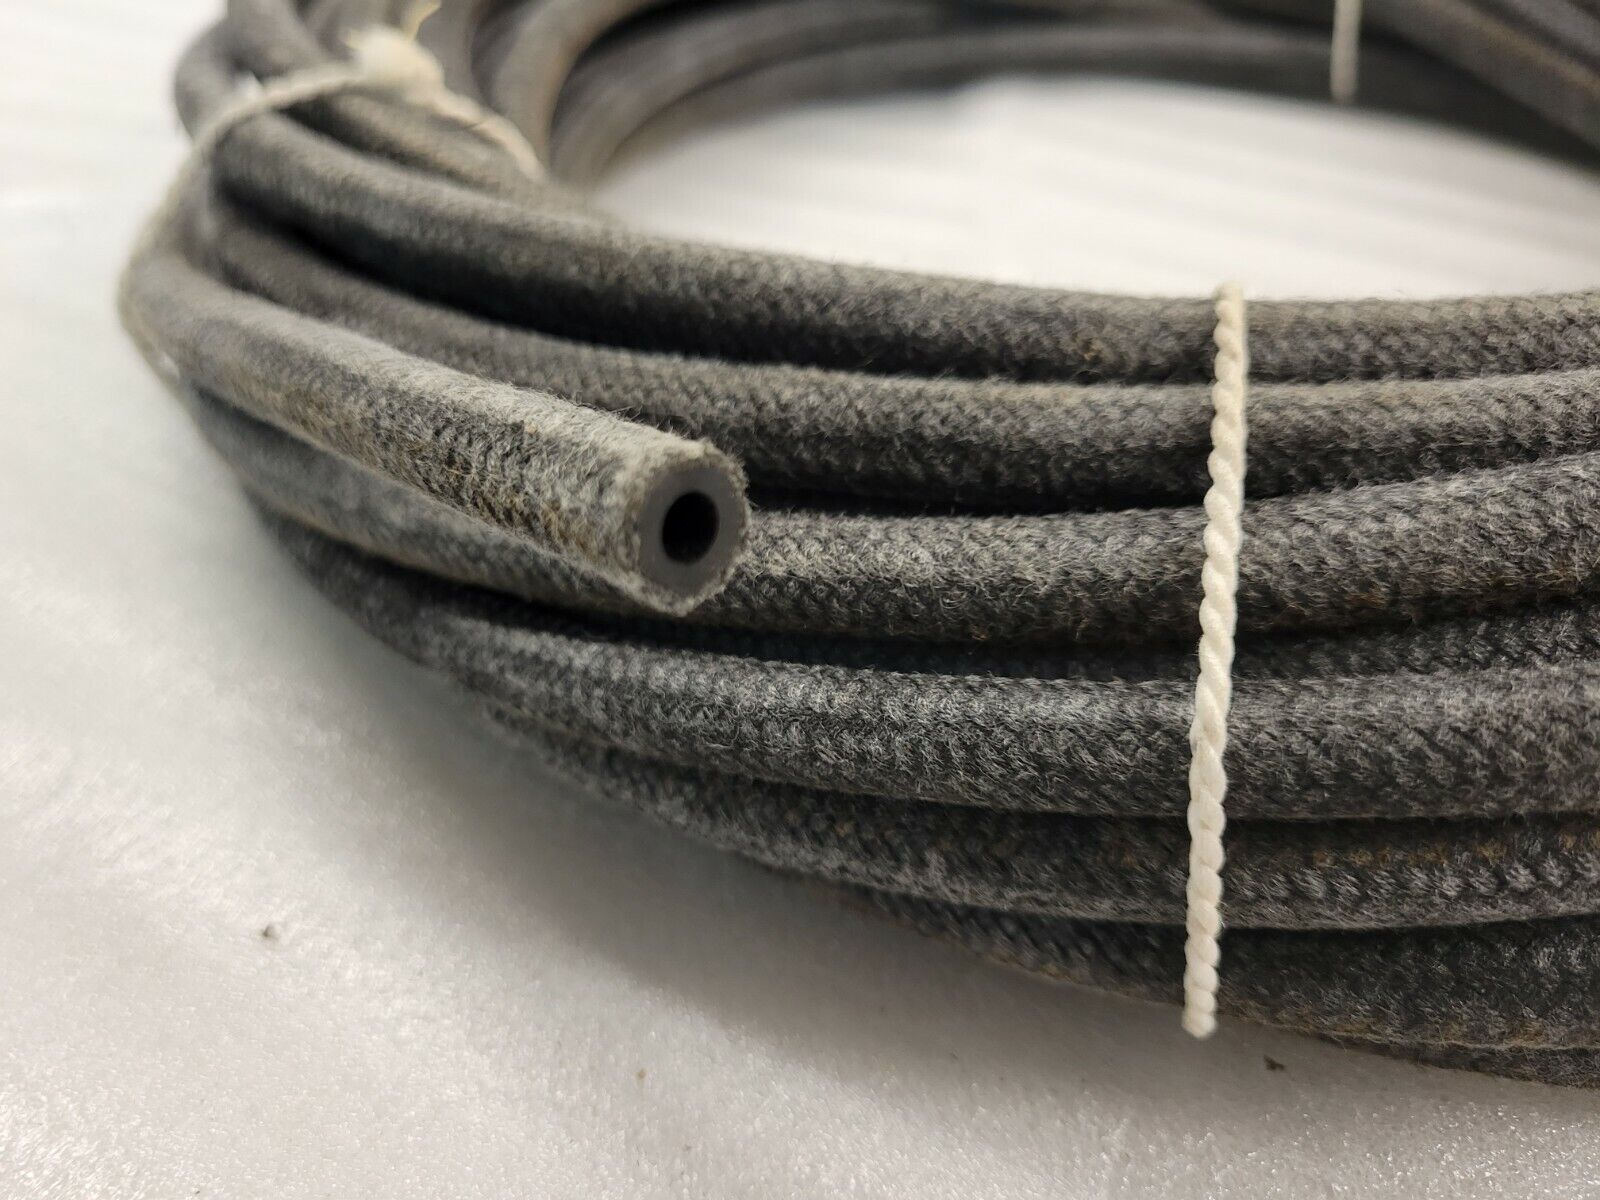 New 5mm ID Cloth Braided Fuel & Breather Hose Line Made in Germany  5 FEET